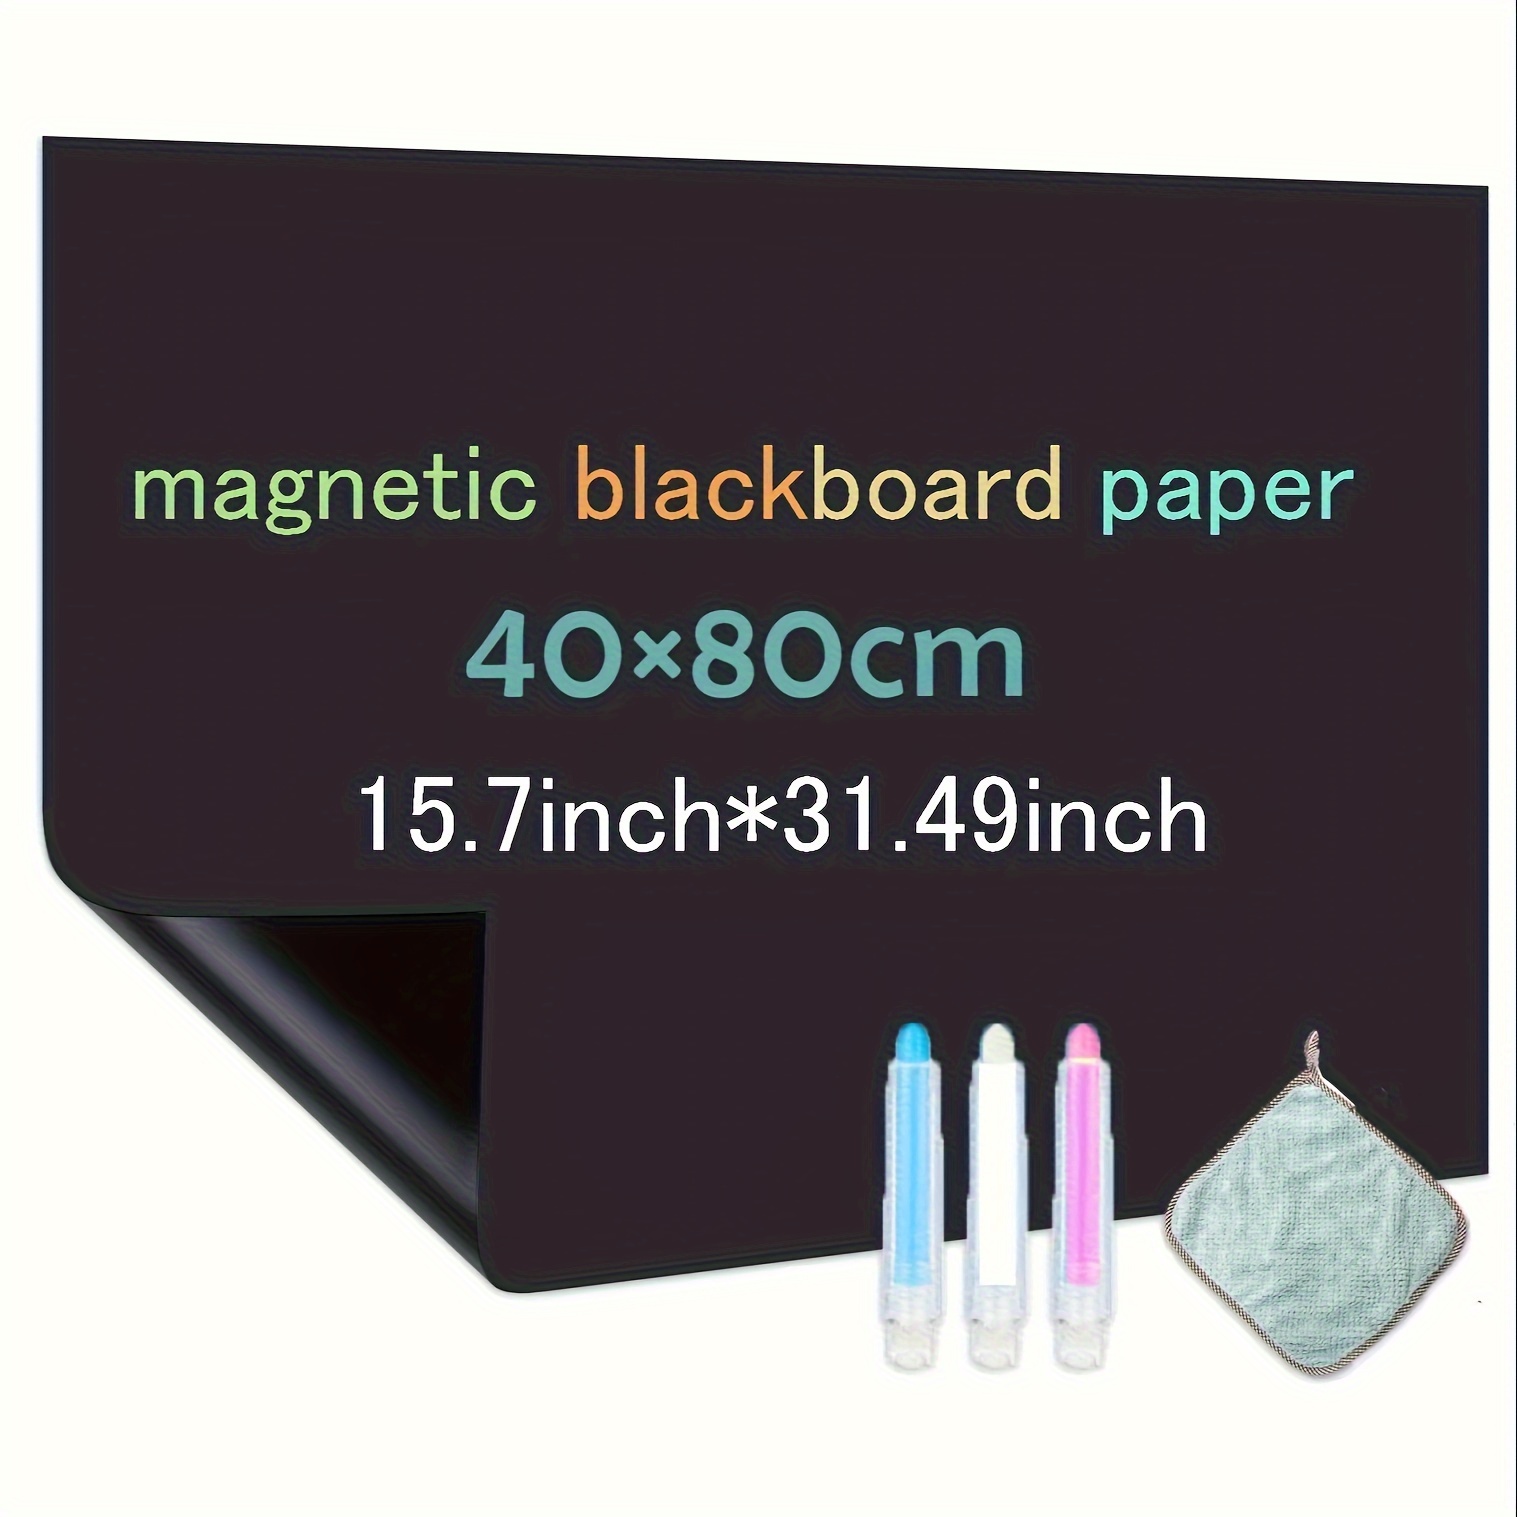 Magnet Expert - Malaysia - Purchase 1 Magnet Roll GET 20pcs Magnet Sheet  #FREE (#FREEDELIVERY) #rubbermagnet #flexiblemagnet #magnetsheet  #magnetsheetmurah #stickermurah #fridgemagnetmalaysia #magnetmalaysia  #stickerprintingmalaysia #stickerprinting